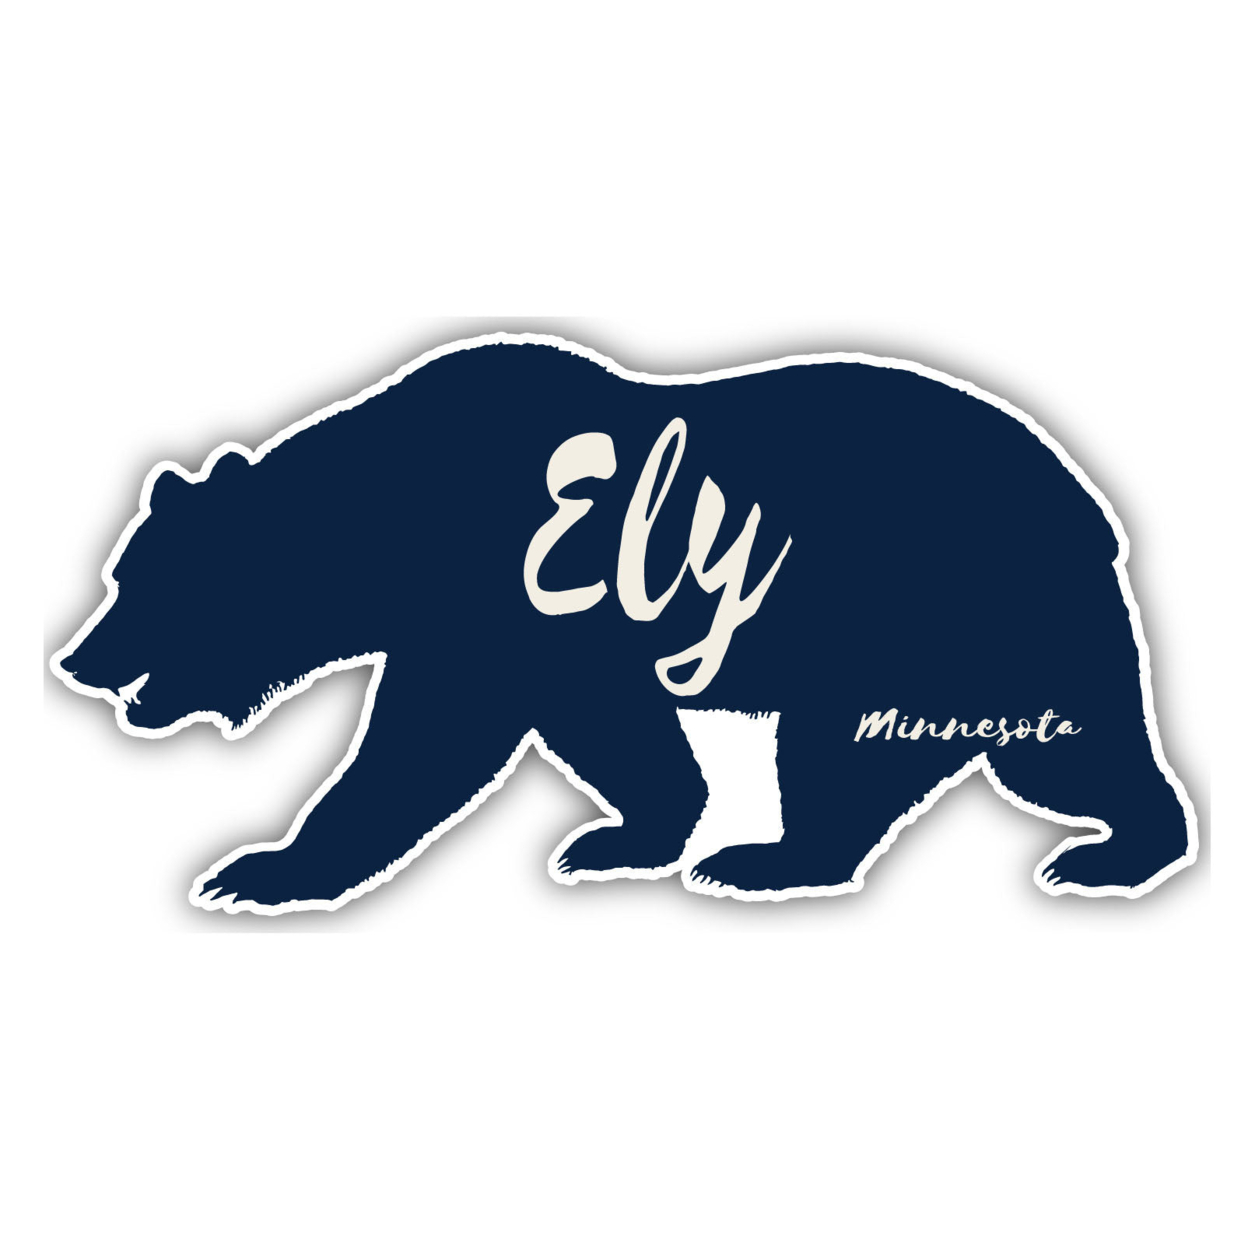 Ely Minnesota Souvenir Decorative Stickers (Choose Theme And Size) - 4-Pack, 4-Inch, Camp Life